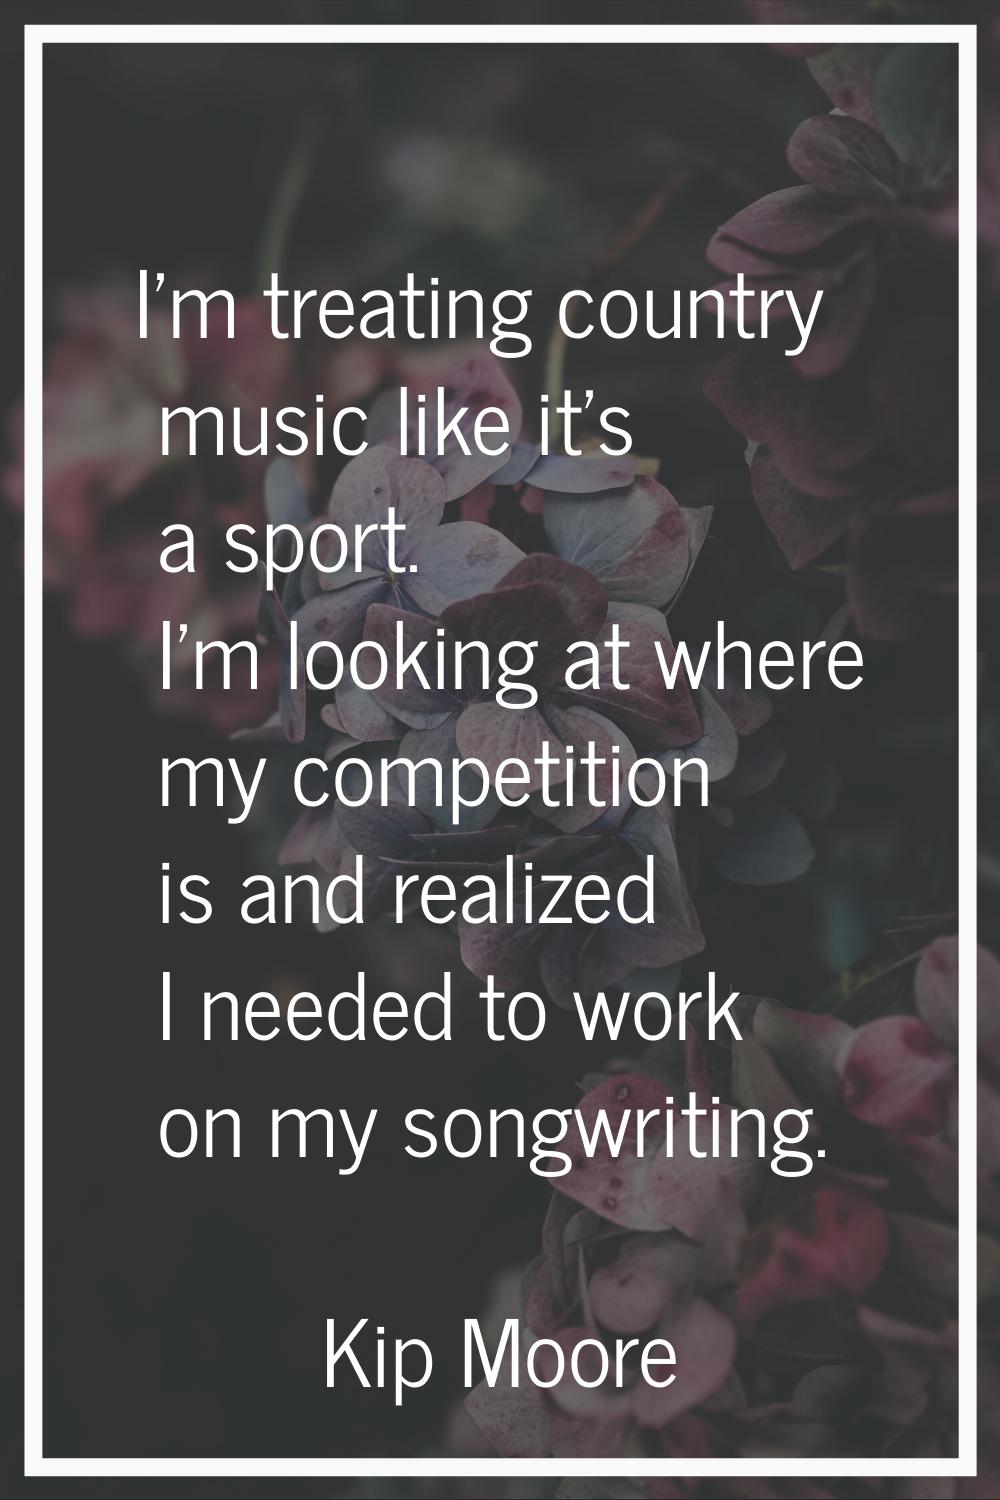 I'm treating country music like it's a sport. I'm looking at where my competition is and realized I